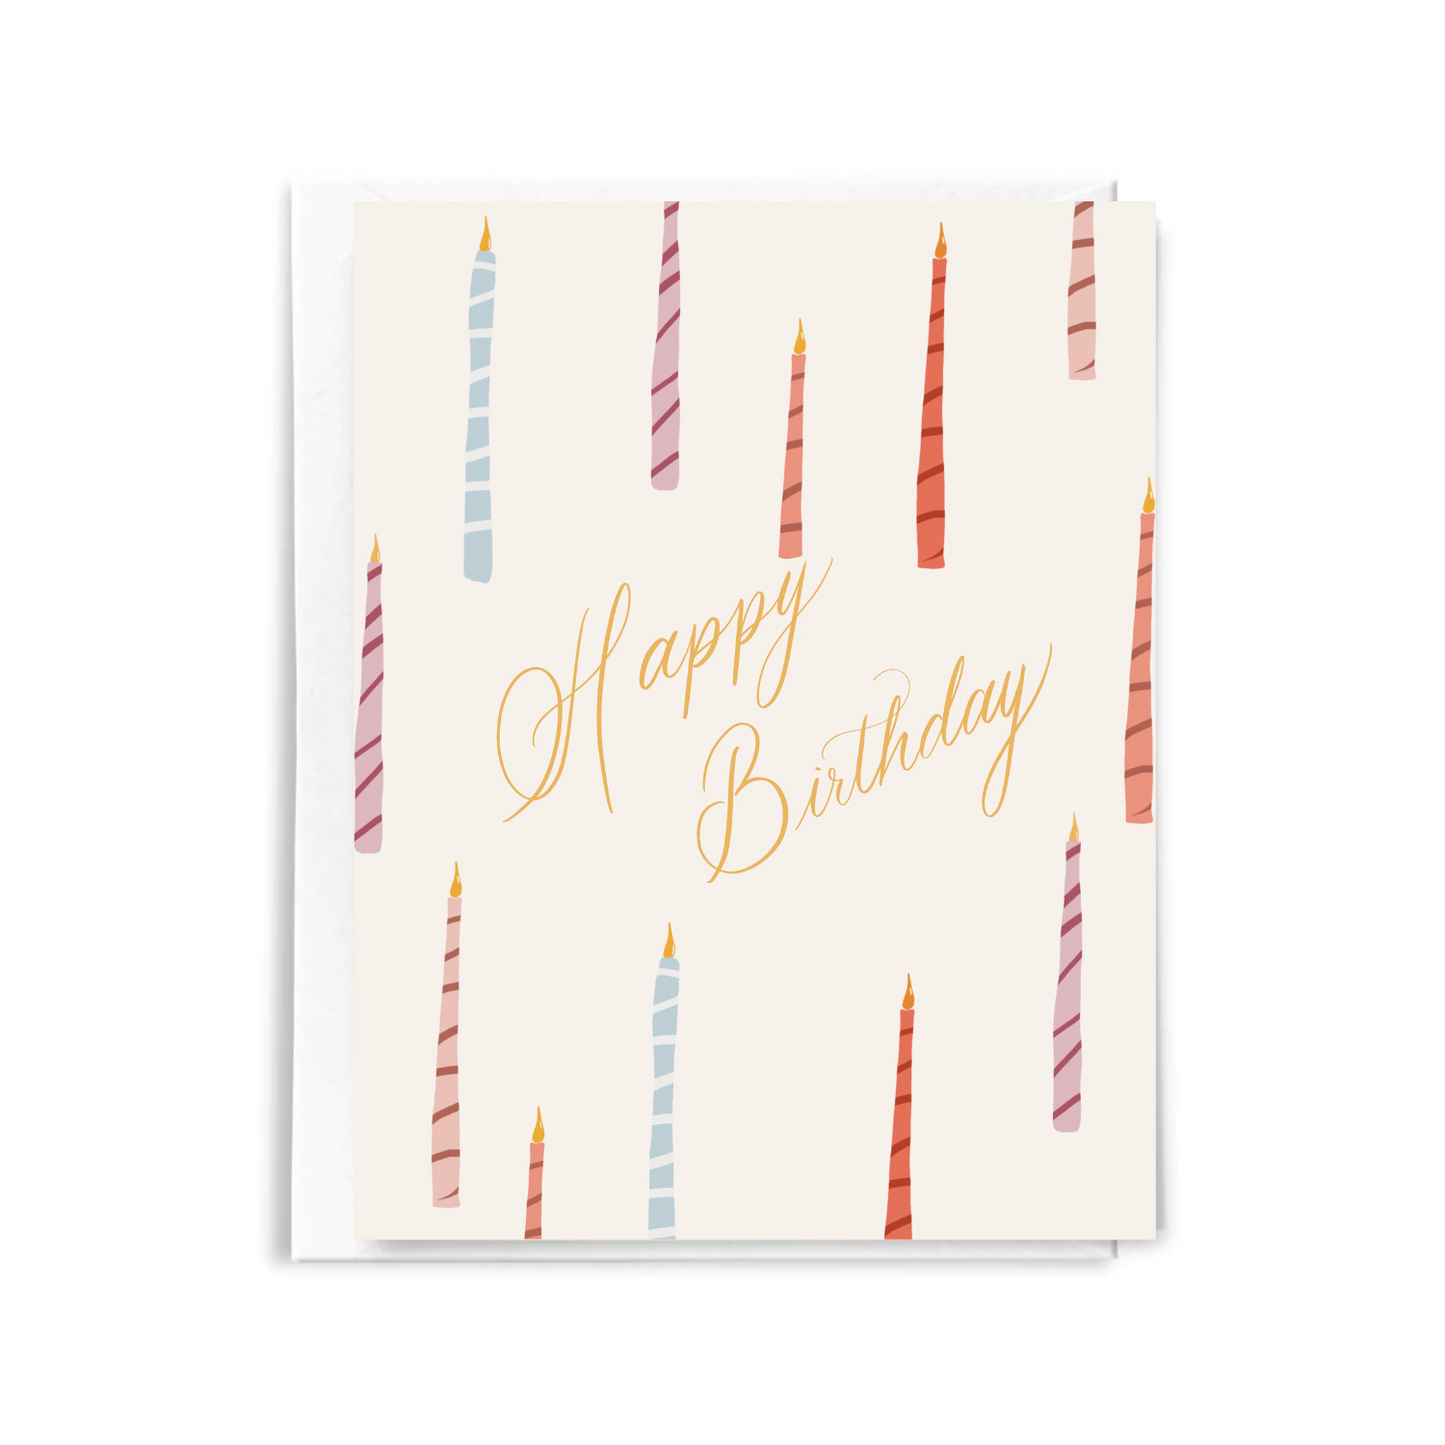 Happy Birthday Candle Card